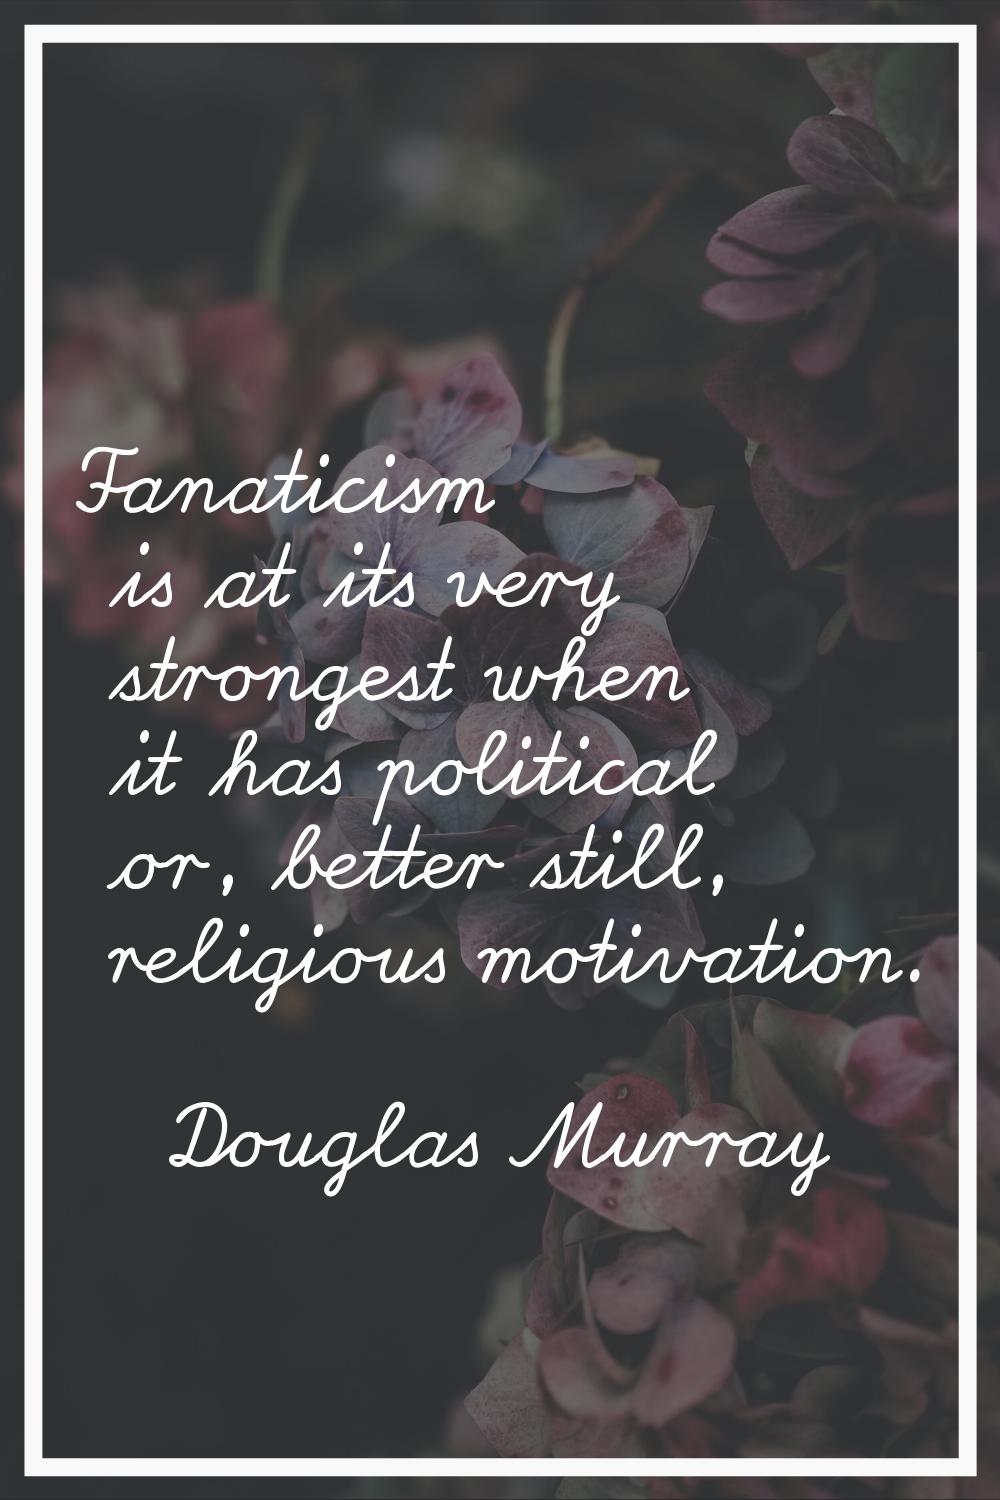 Fanaticism is at its very strongest when it has political or, better still, religious motivation.